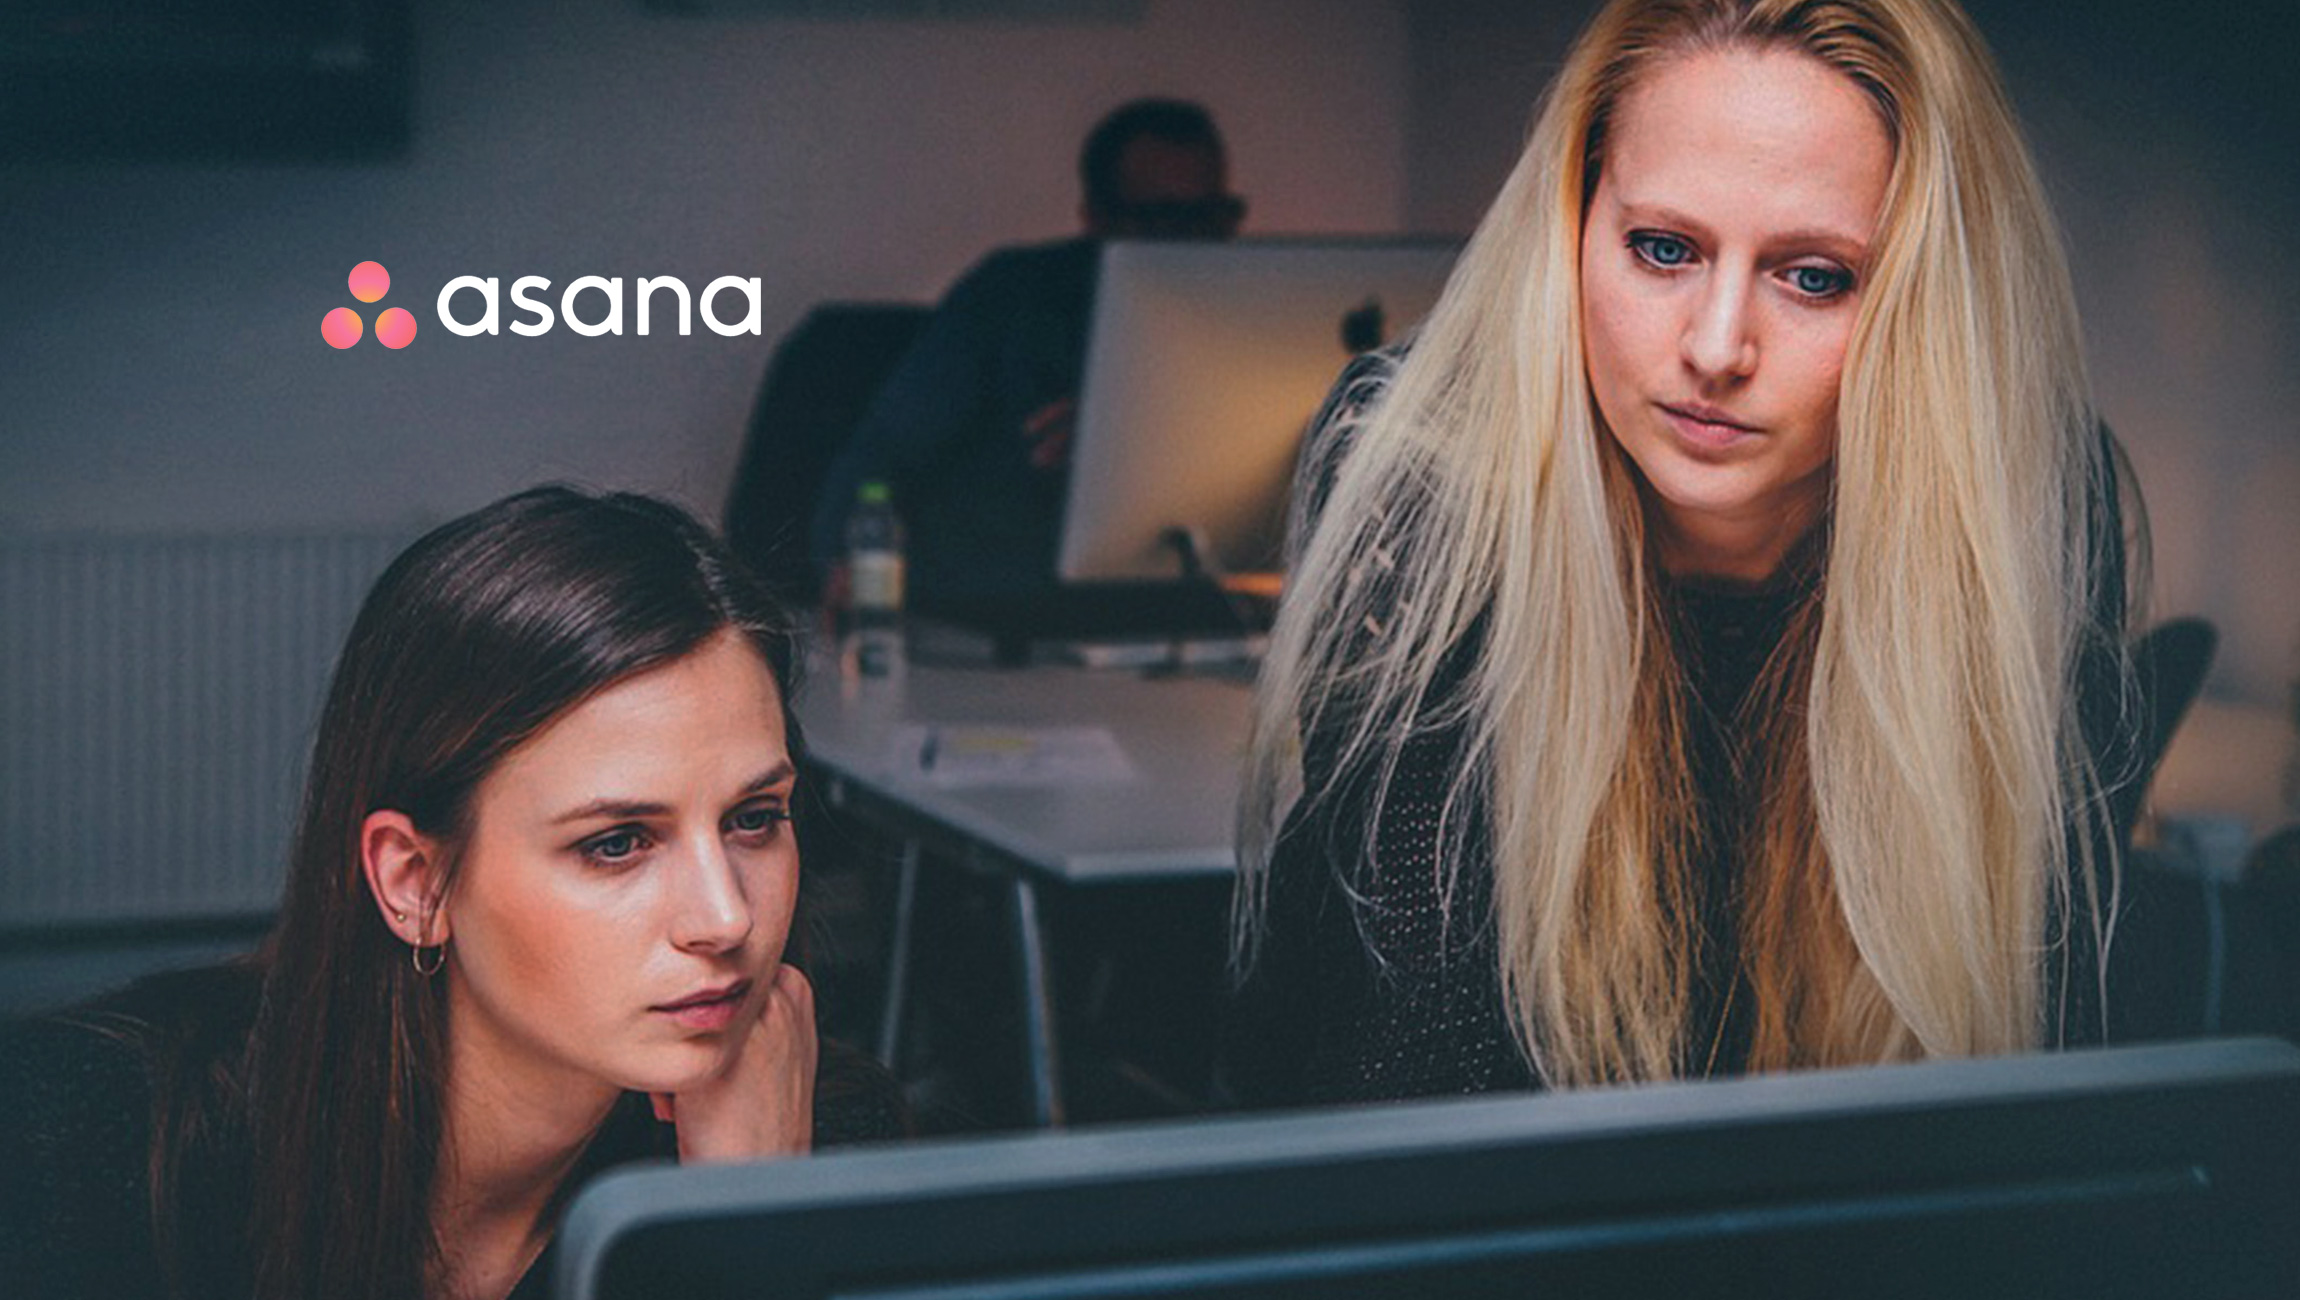 From Creative Brief to Campaign Launch - Introducing Asana for Marketing and Creative Teams